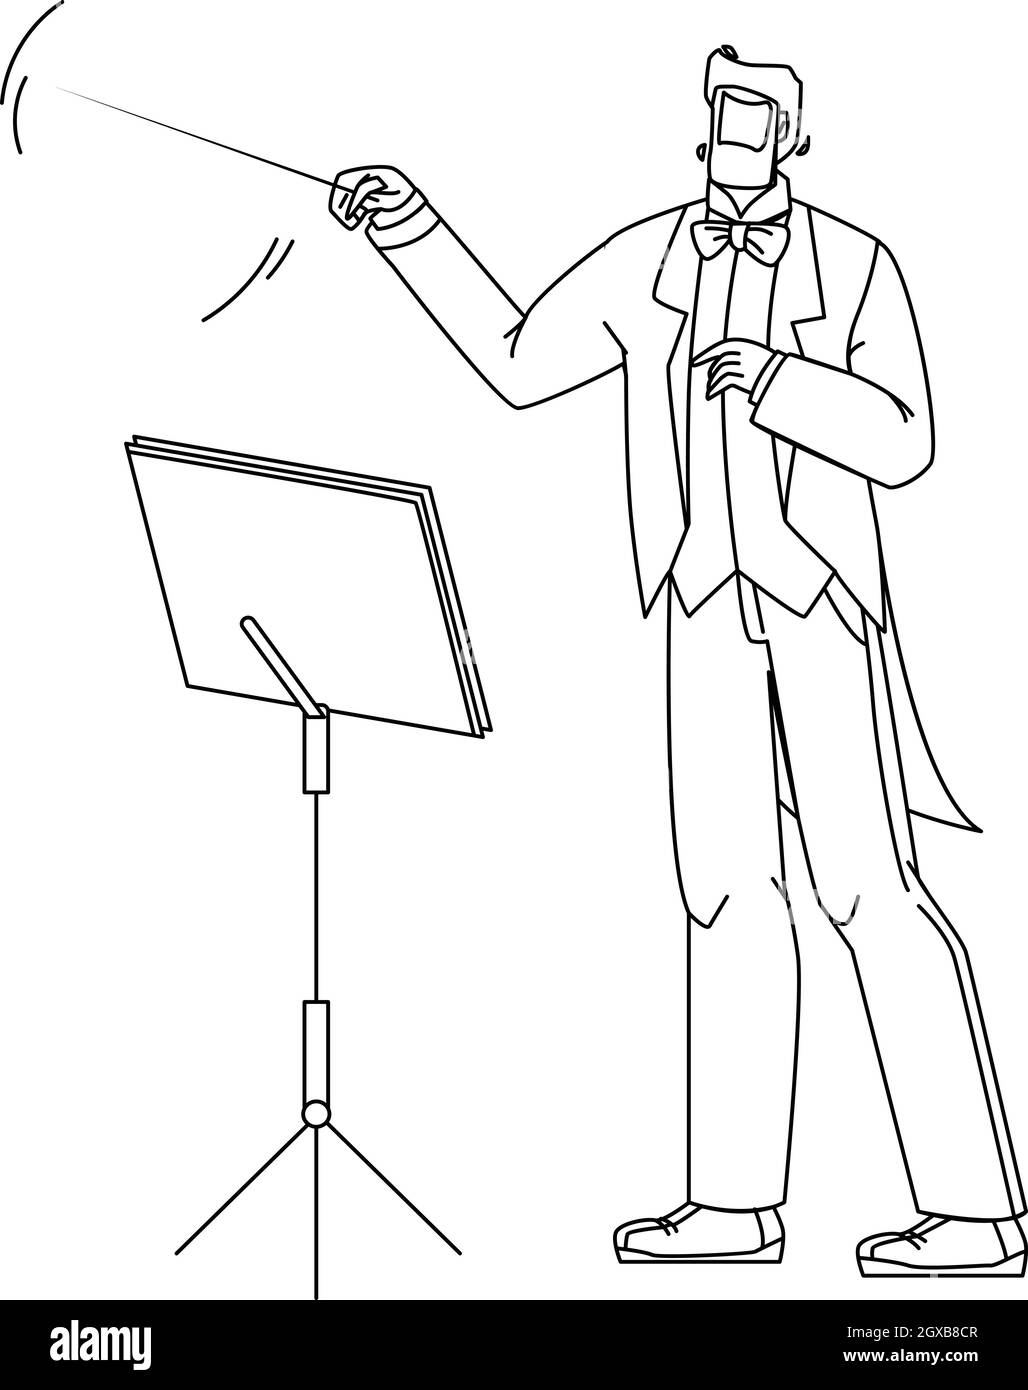 Music Conductor Man Conducting Orchestra Vector Illustration Stock Vector